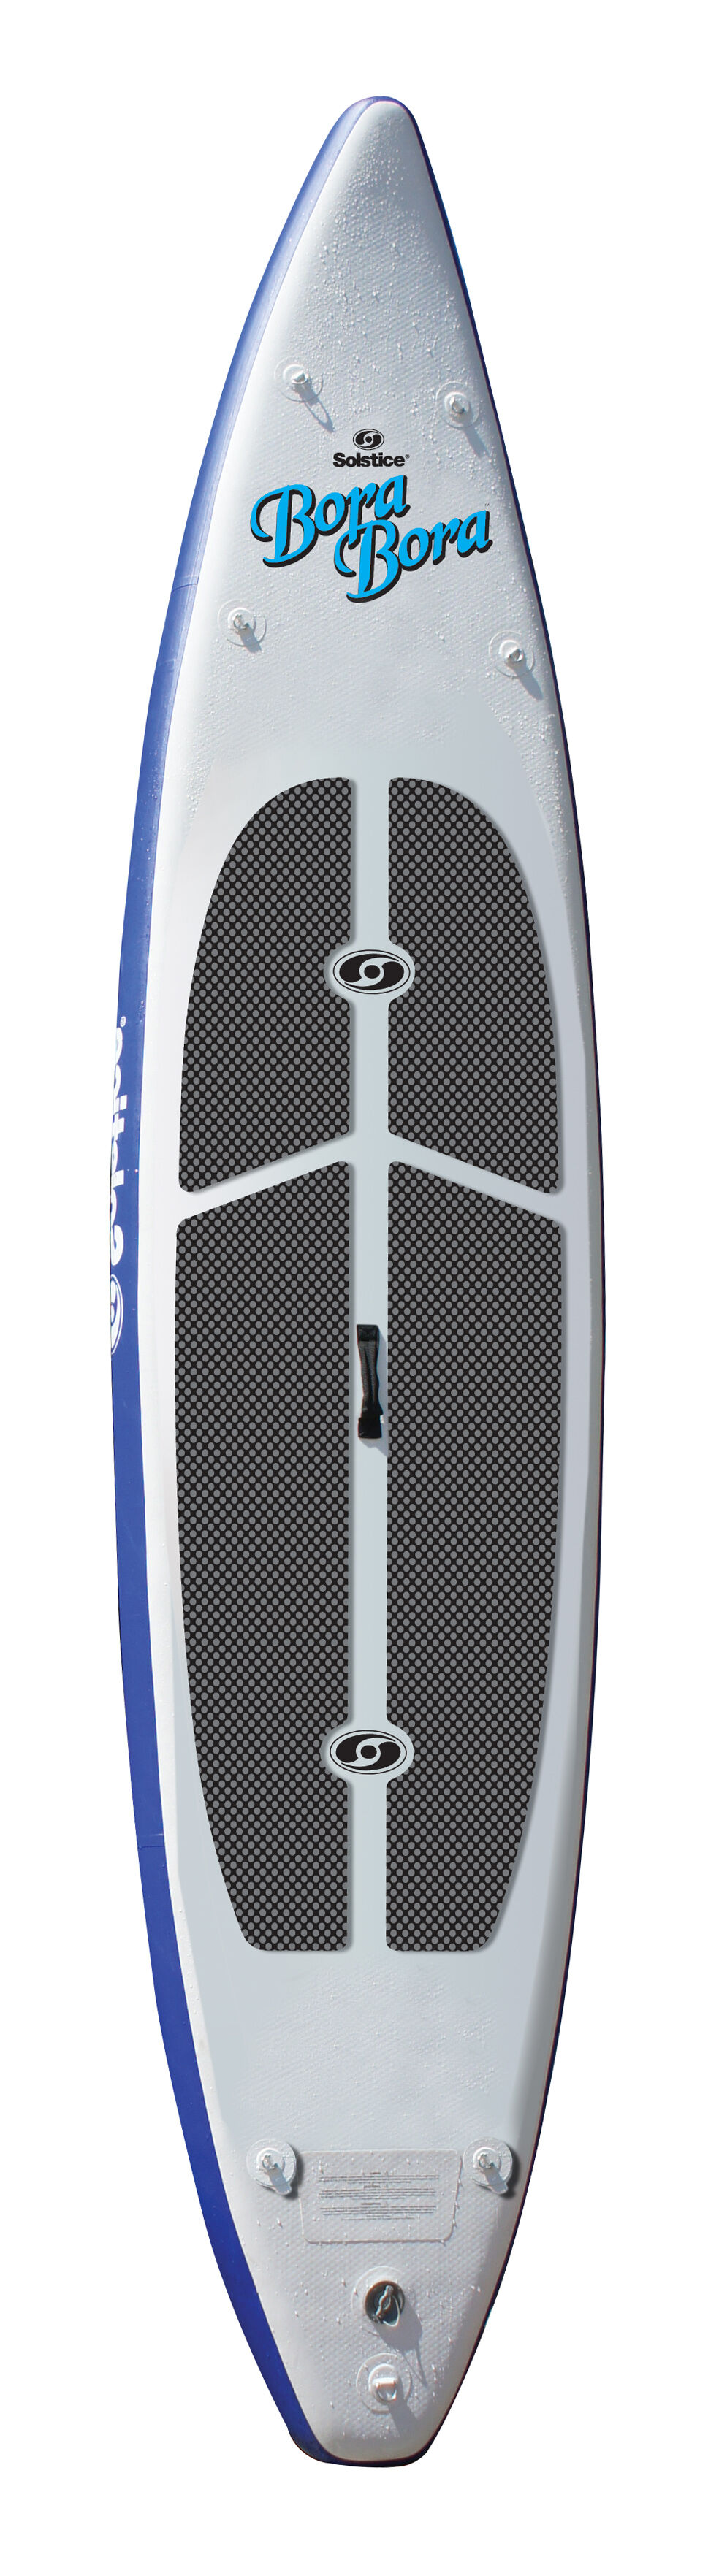 Solstice Bora Bora Inflatable Stand Up Paddleboard